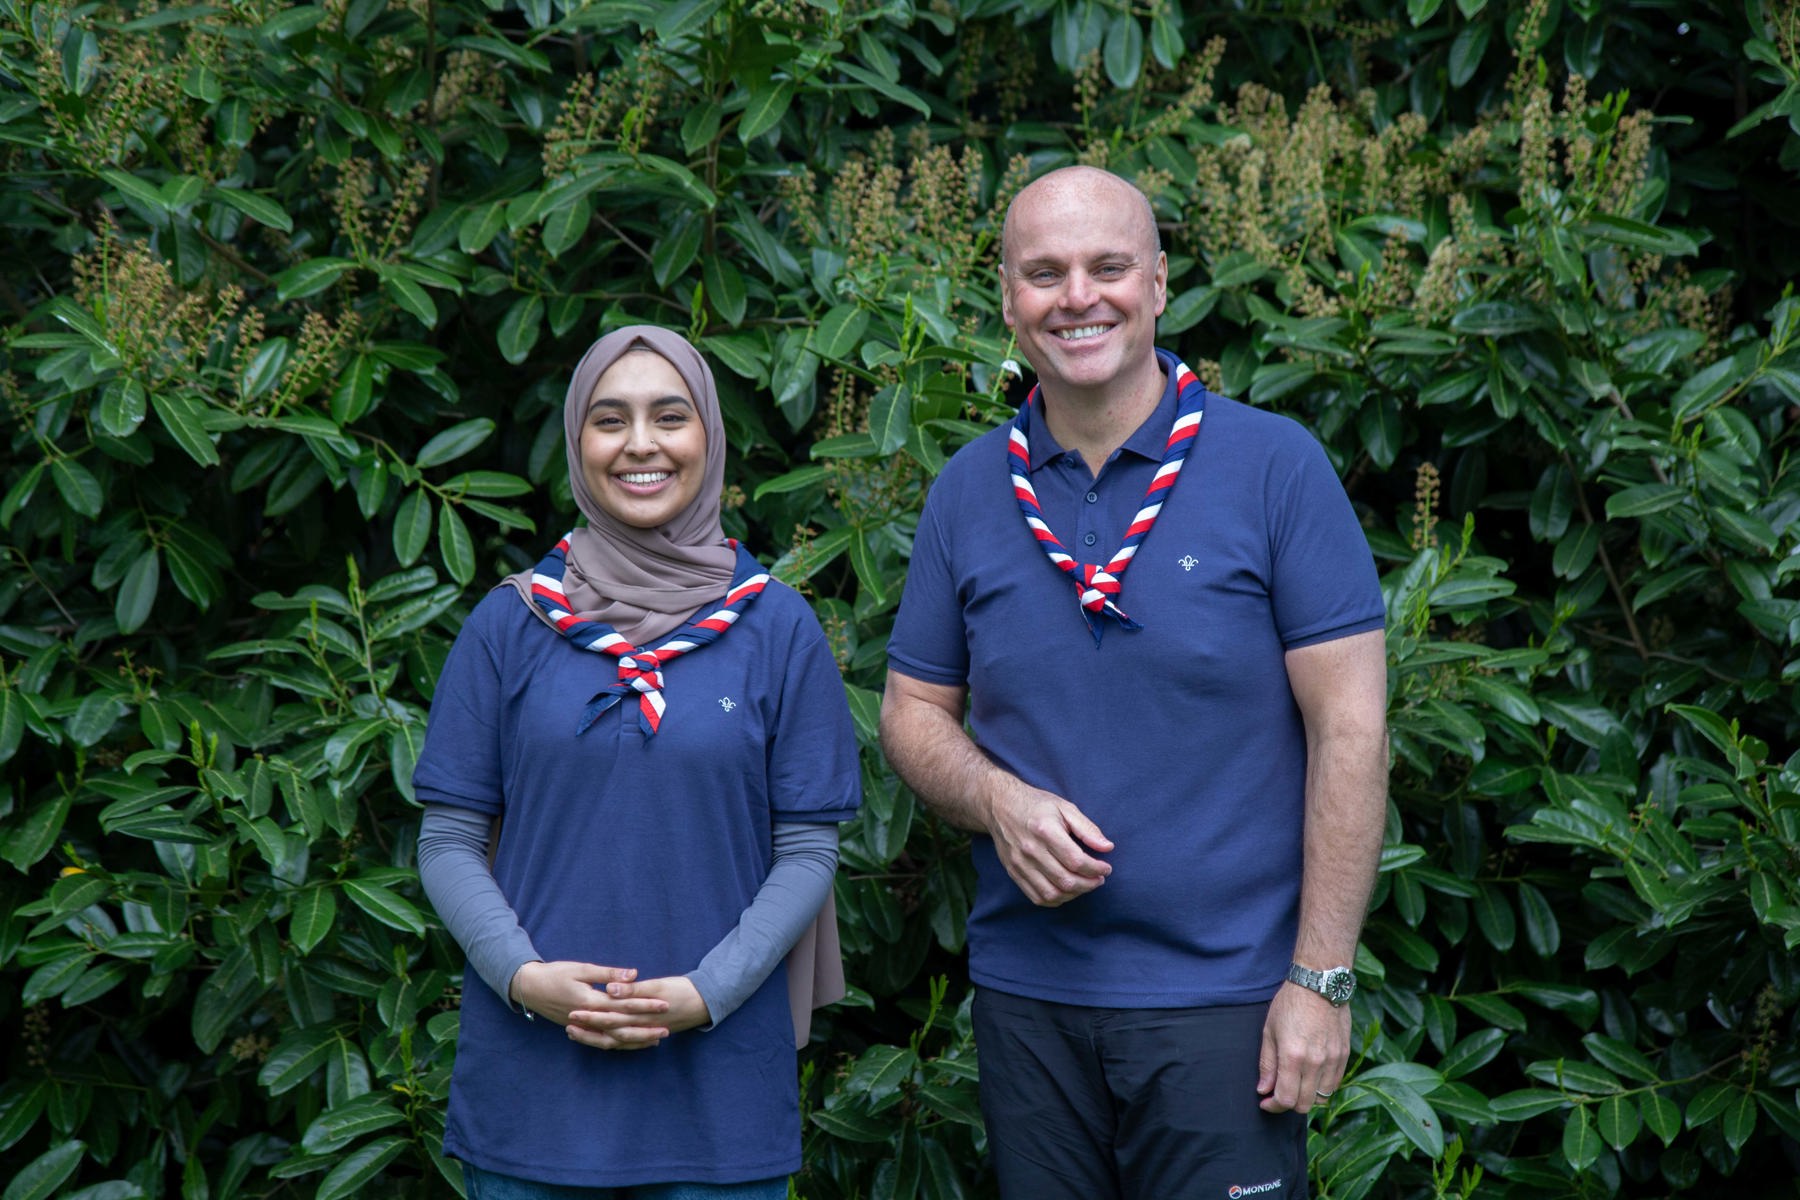 Ayesha and Carl wearing Scouts polo shirts and neckers, standing in front of bushes, smiling at the camera